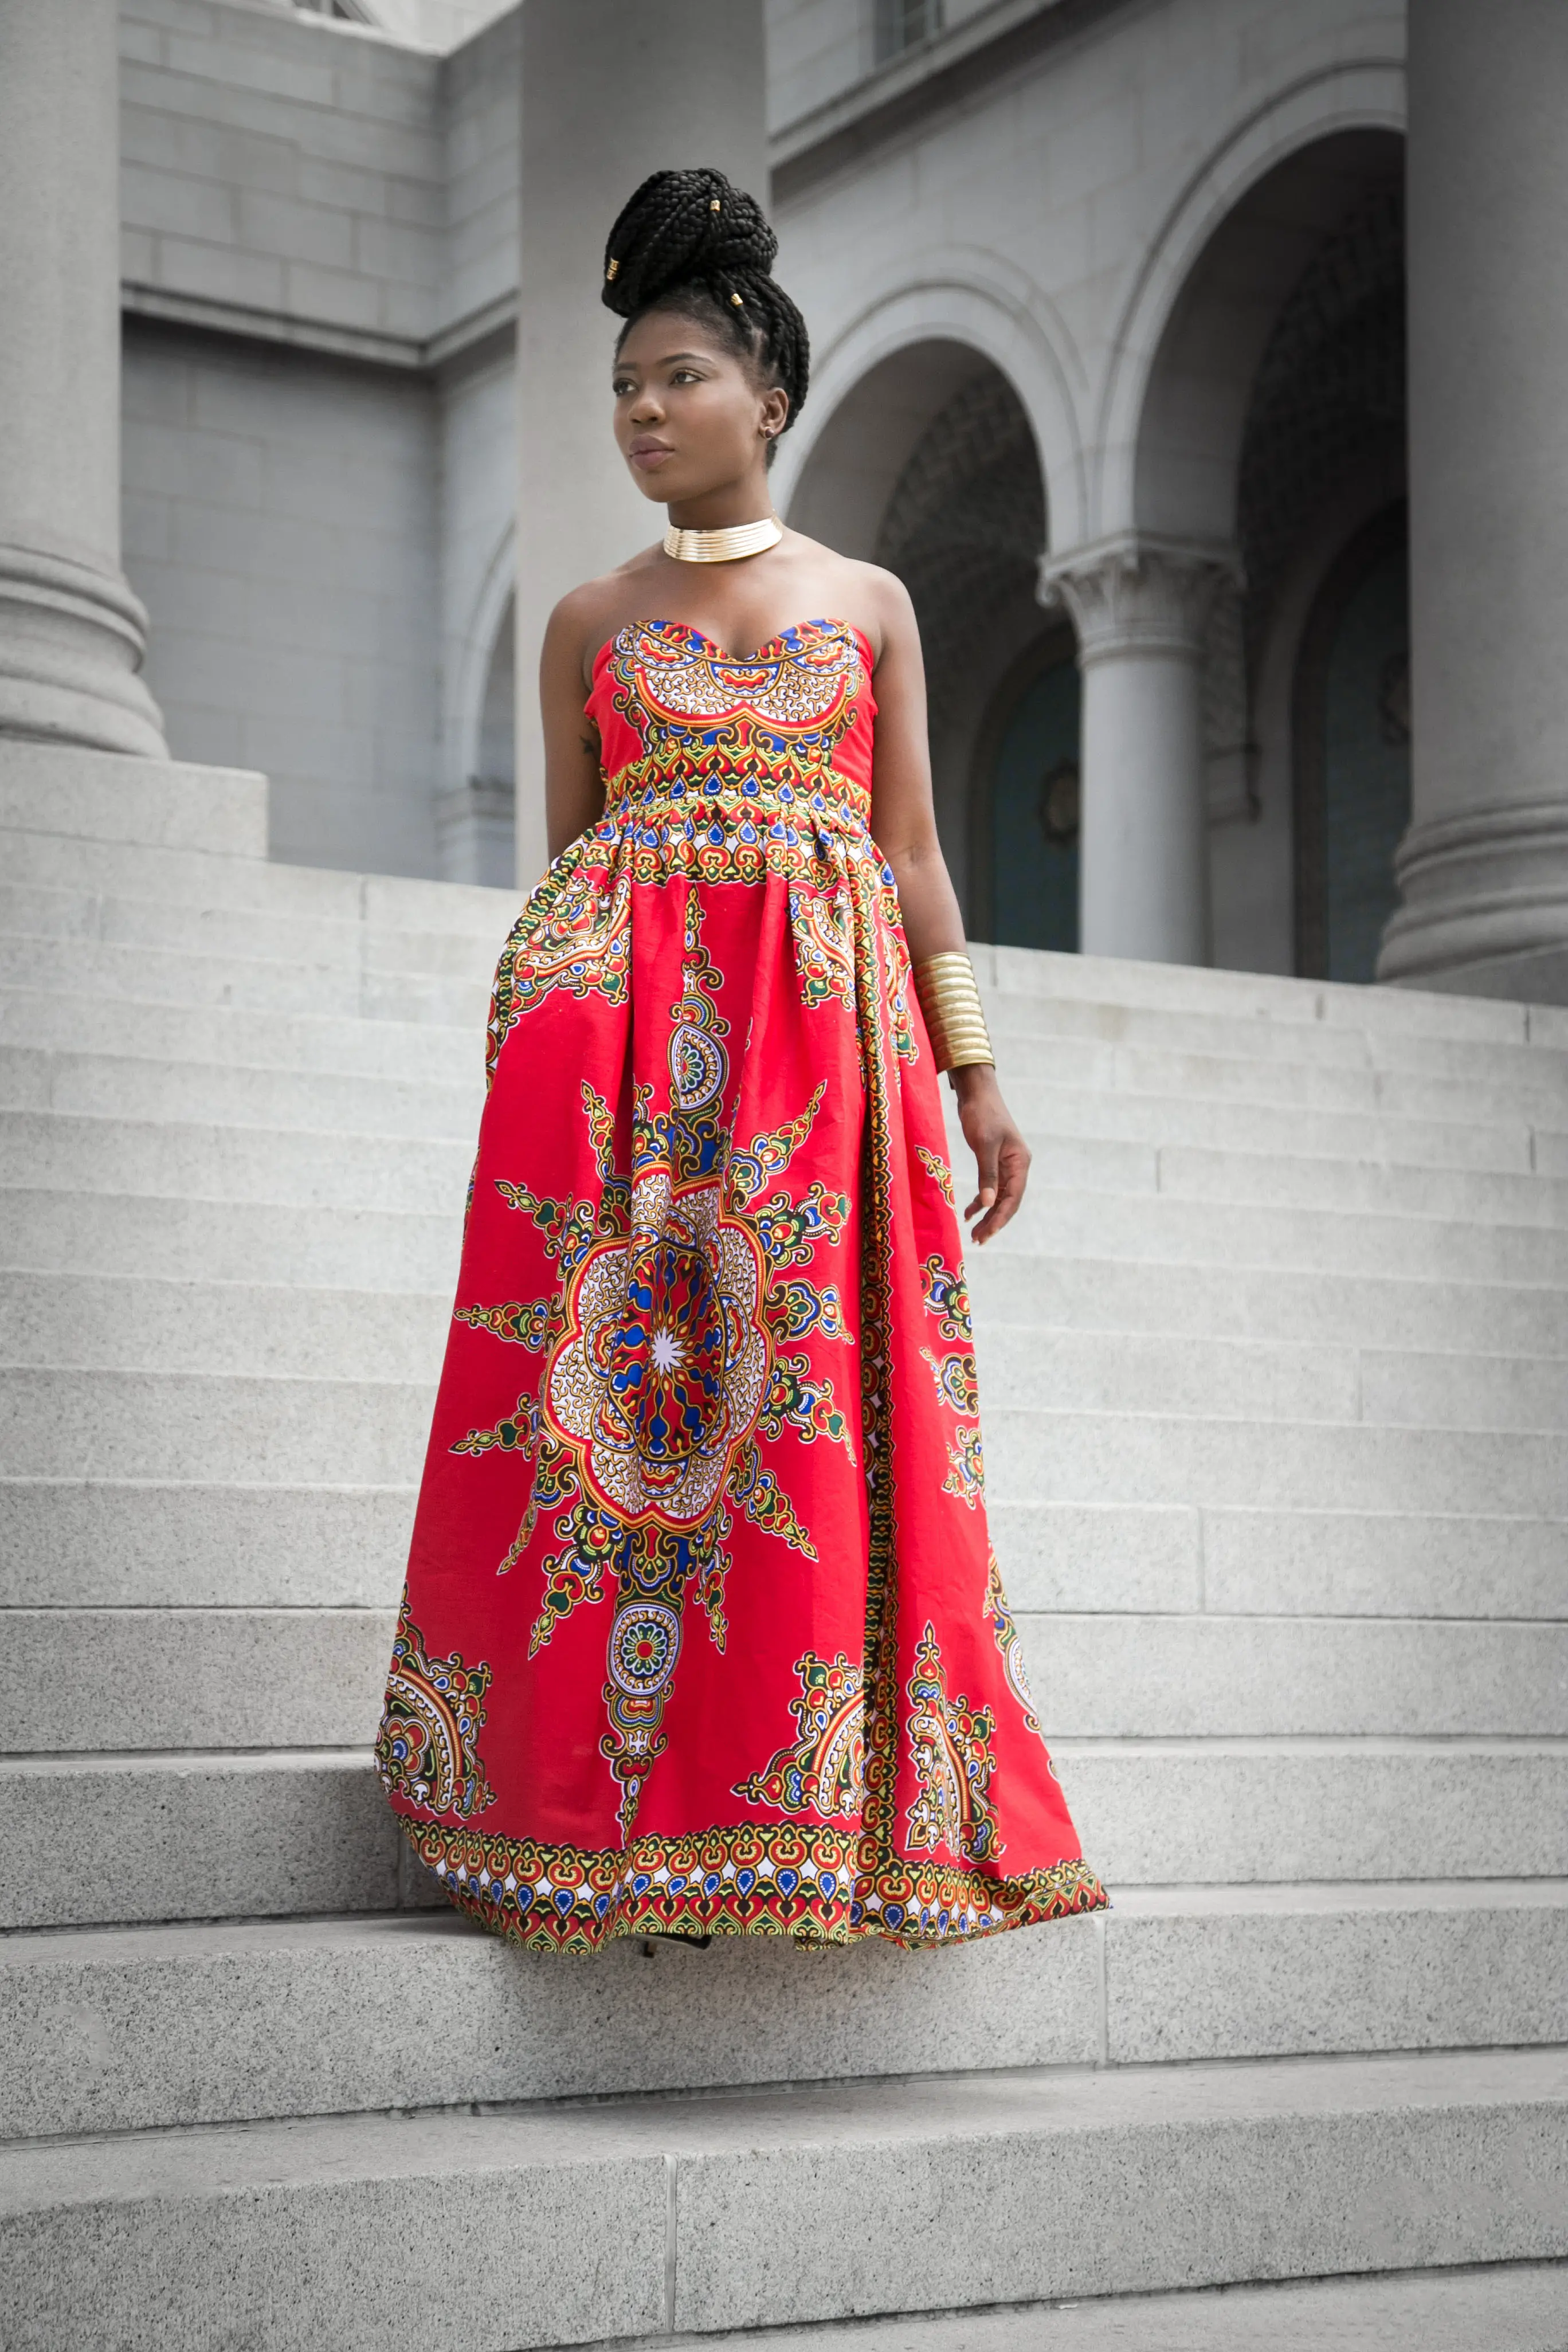 Contemporary Ankara Maxi Dresses The Fabulous Ladies Are Rocking These Days